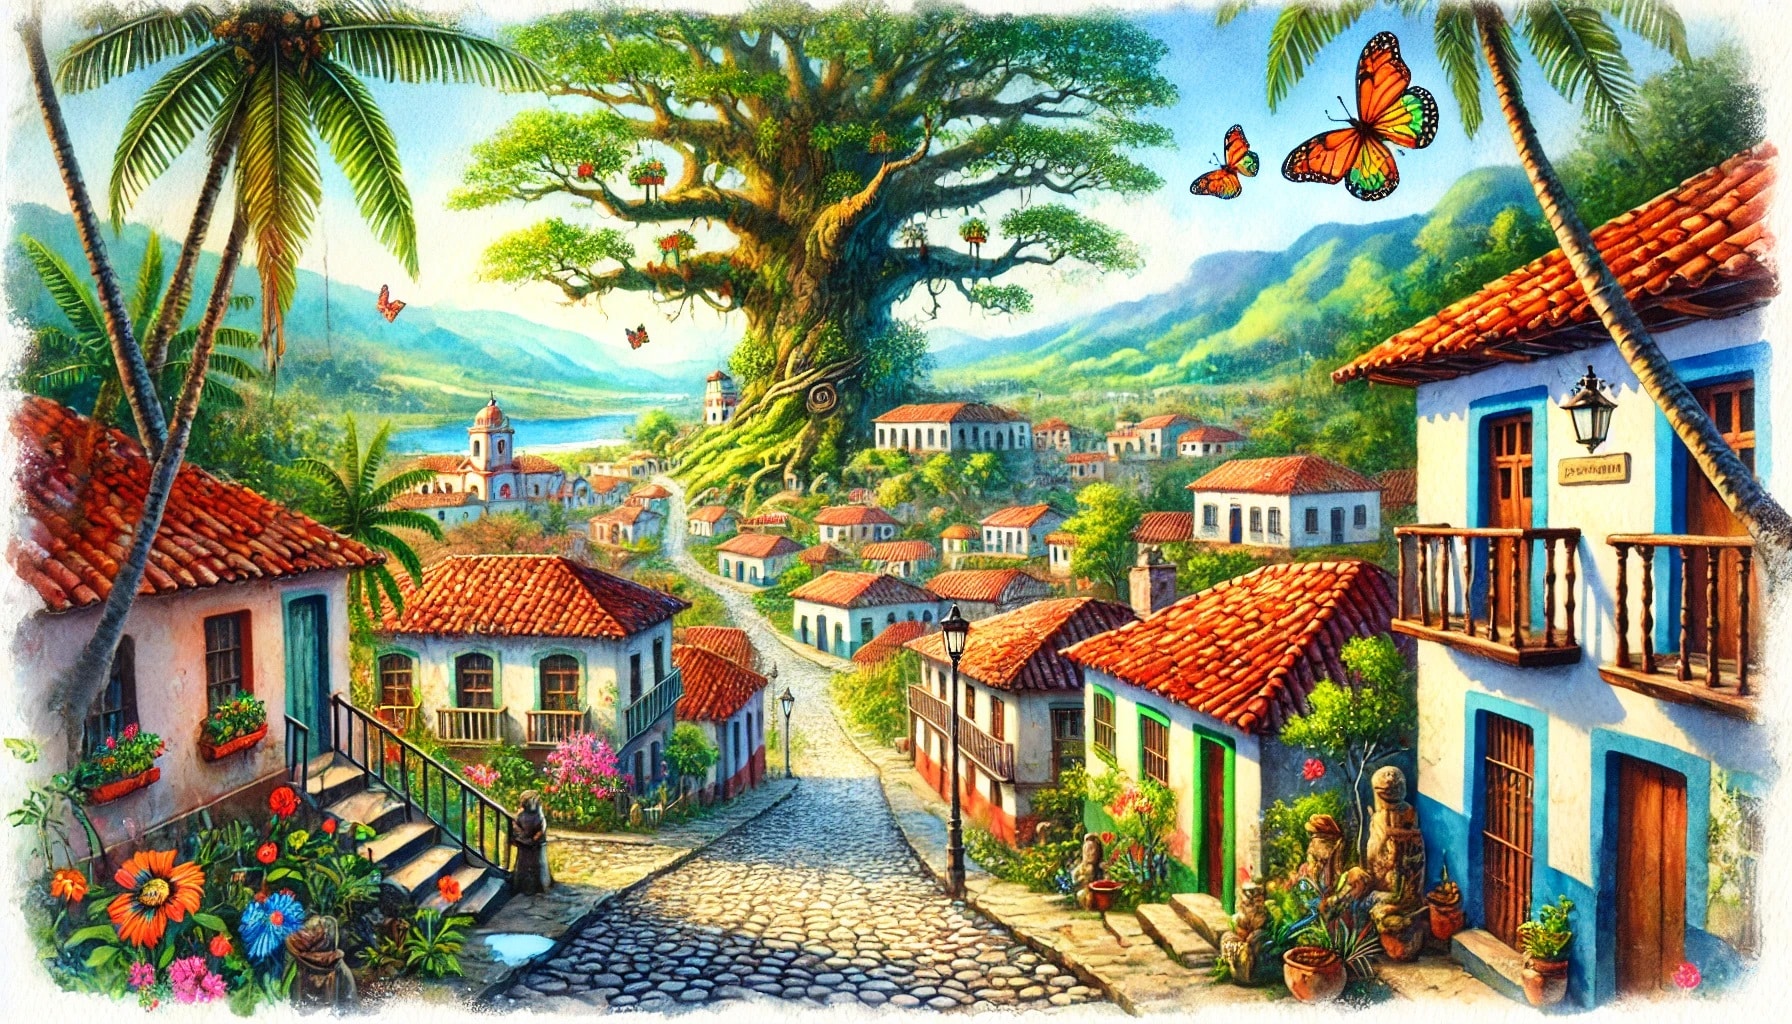 Macondo, A vibrant, tropical village with colorful, red-roofed houses lines a cobblestone street. Lush, blooming flowers decorate the balconies. At the center, a massive, ancient tree with a sprawling canopy towers over the village, reminiscent of scenes from Gabriel García Márquez's One Hundred Years of Solitude.